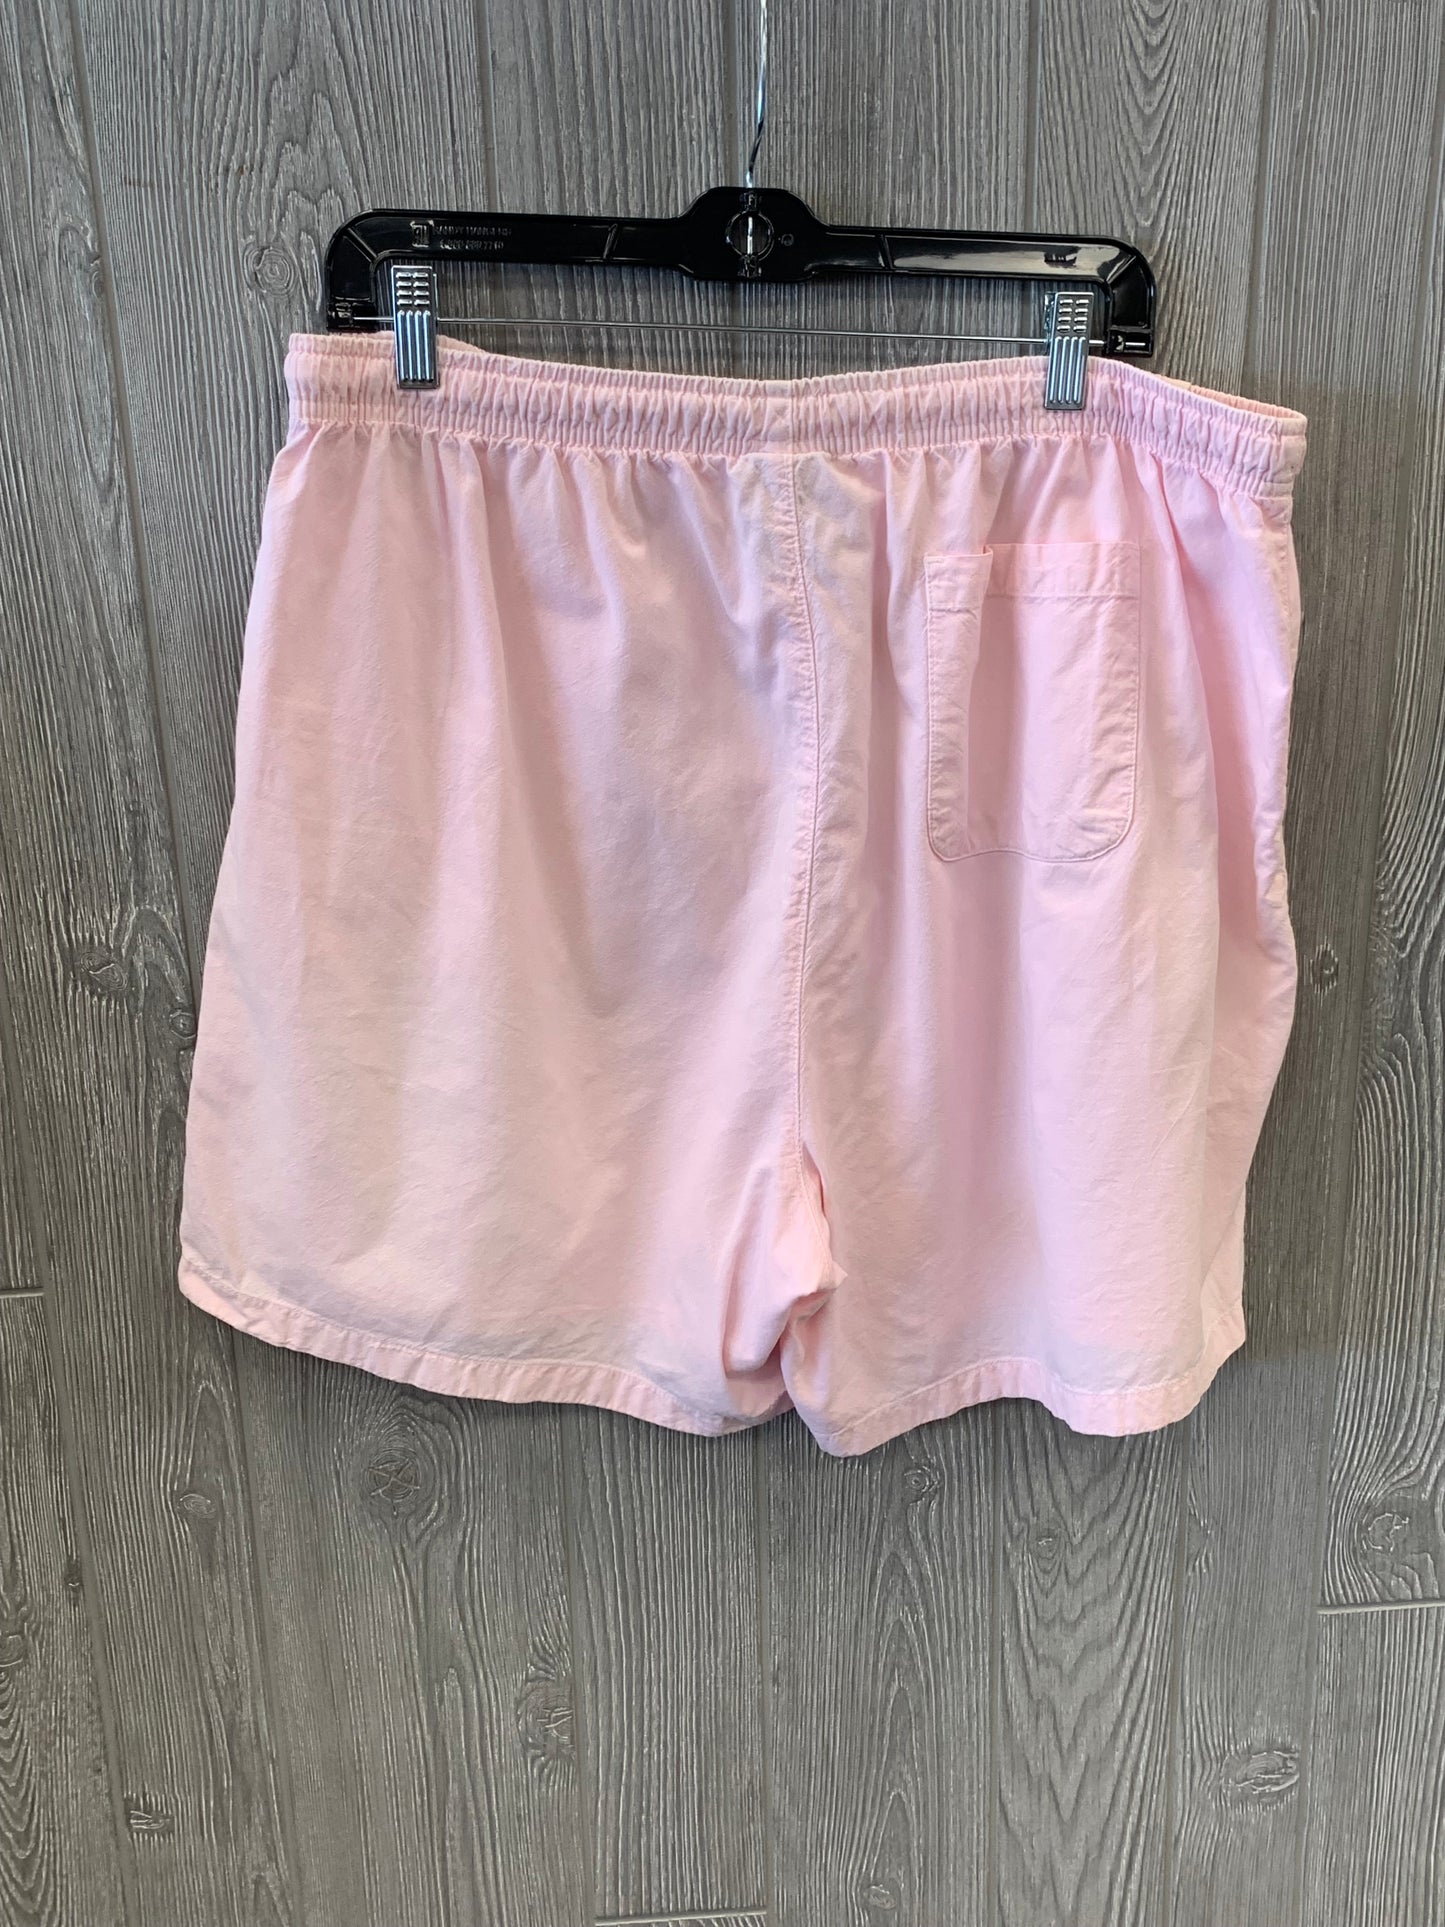 Shorts By Classic Elements  Size: 16